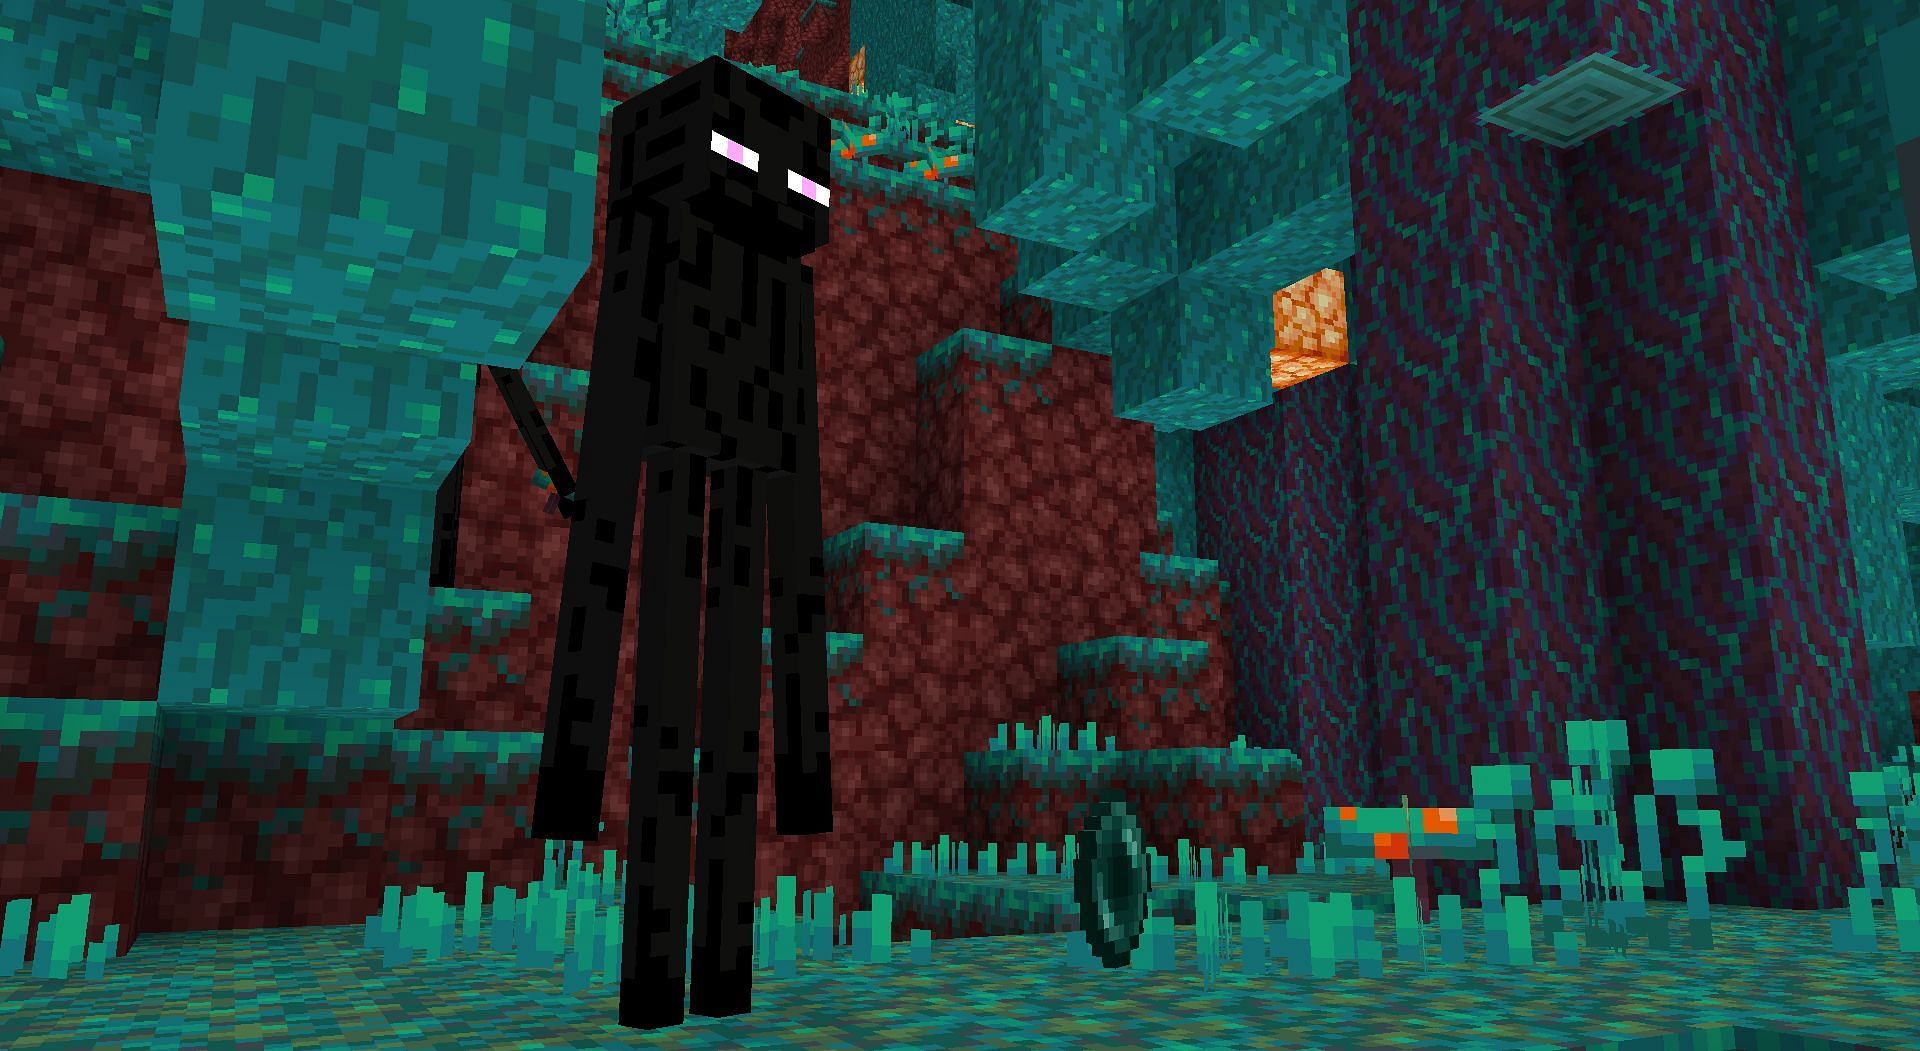 Enderman gets hostile if a player looks at them for too long in Minecraft (Image via Mojang)